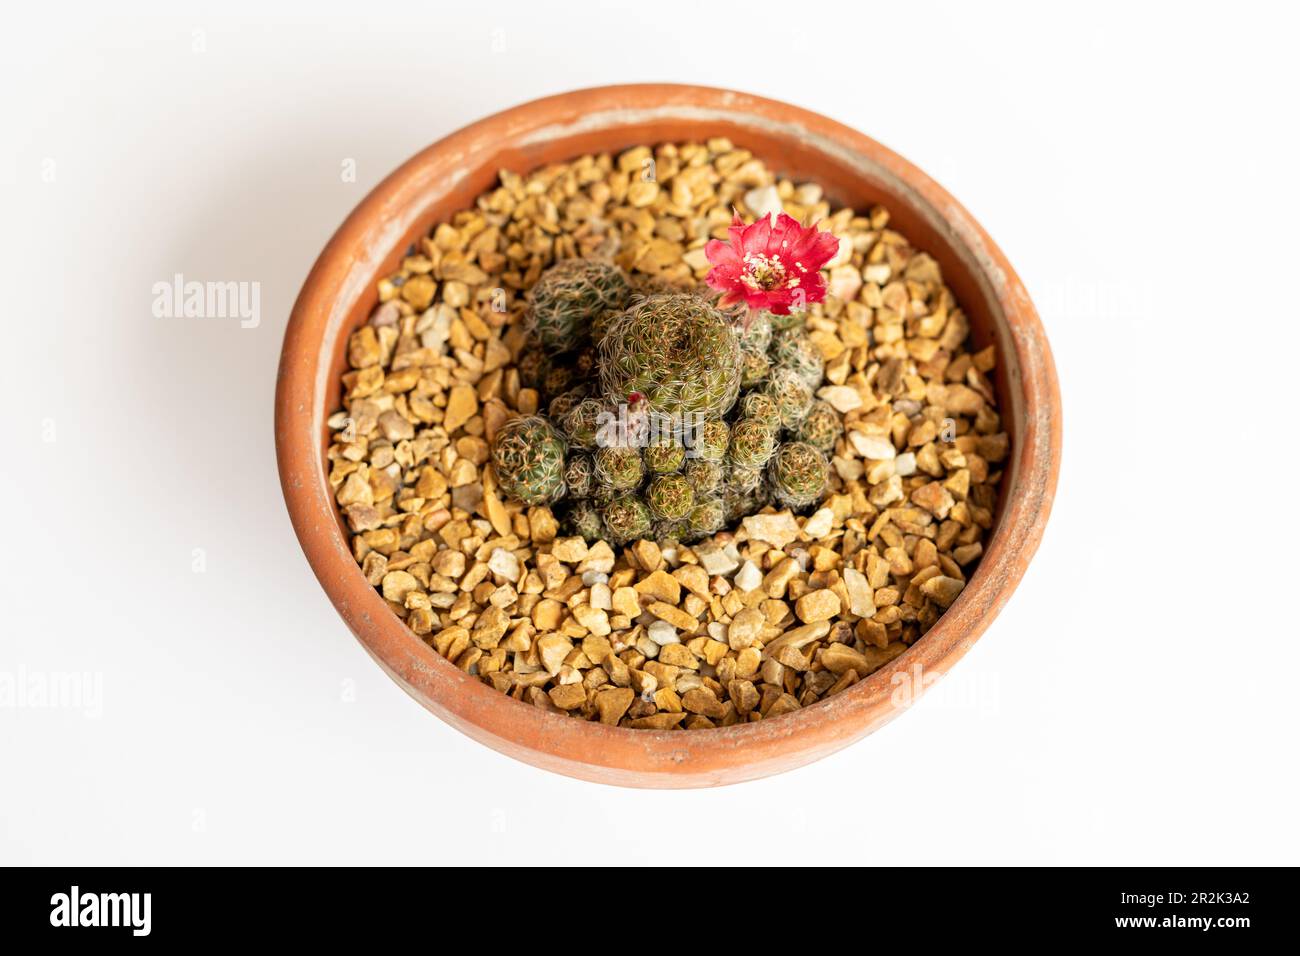 High angle view of a rebutia flowering cactus on isolated white background Stock Photo